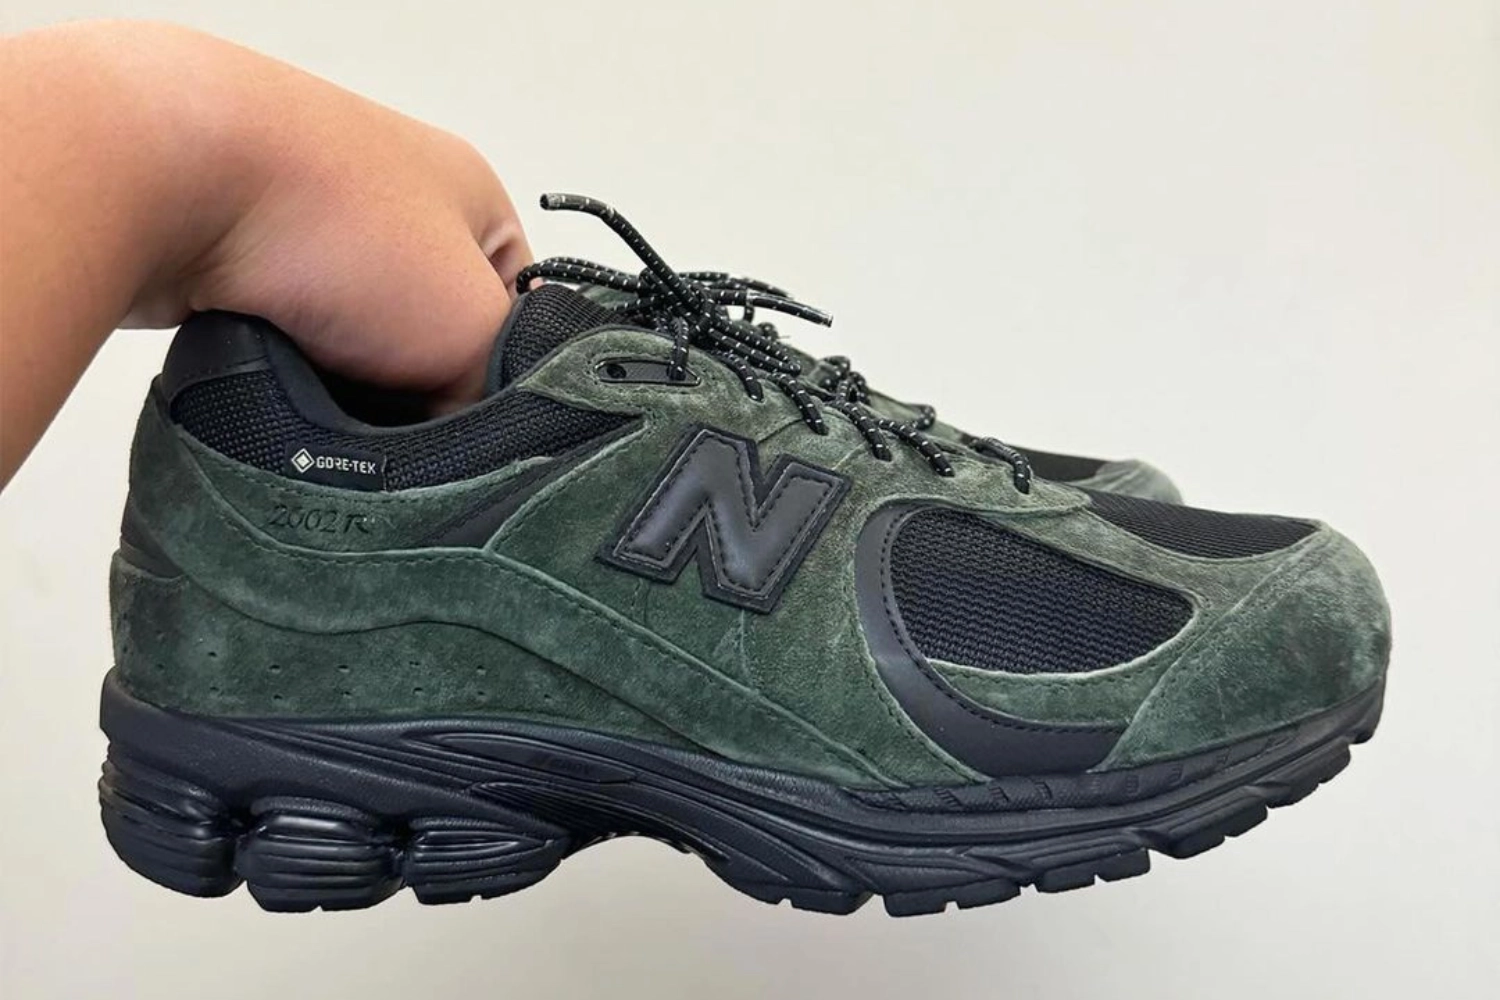 First images of the JJJound x New Balance 2002R GORE-TEX 'Green'